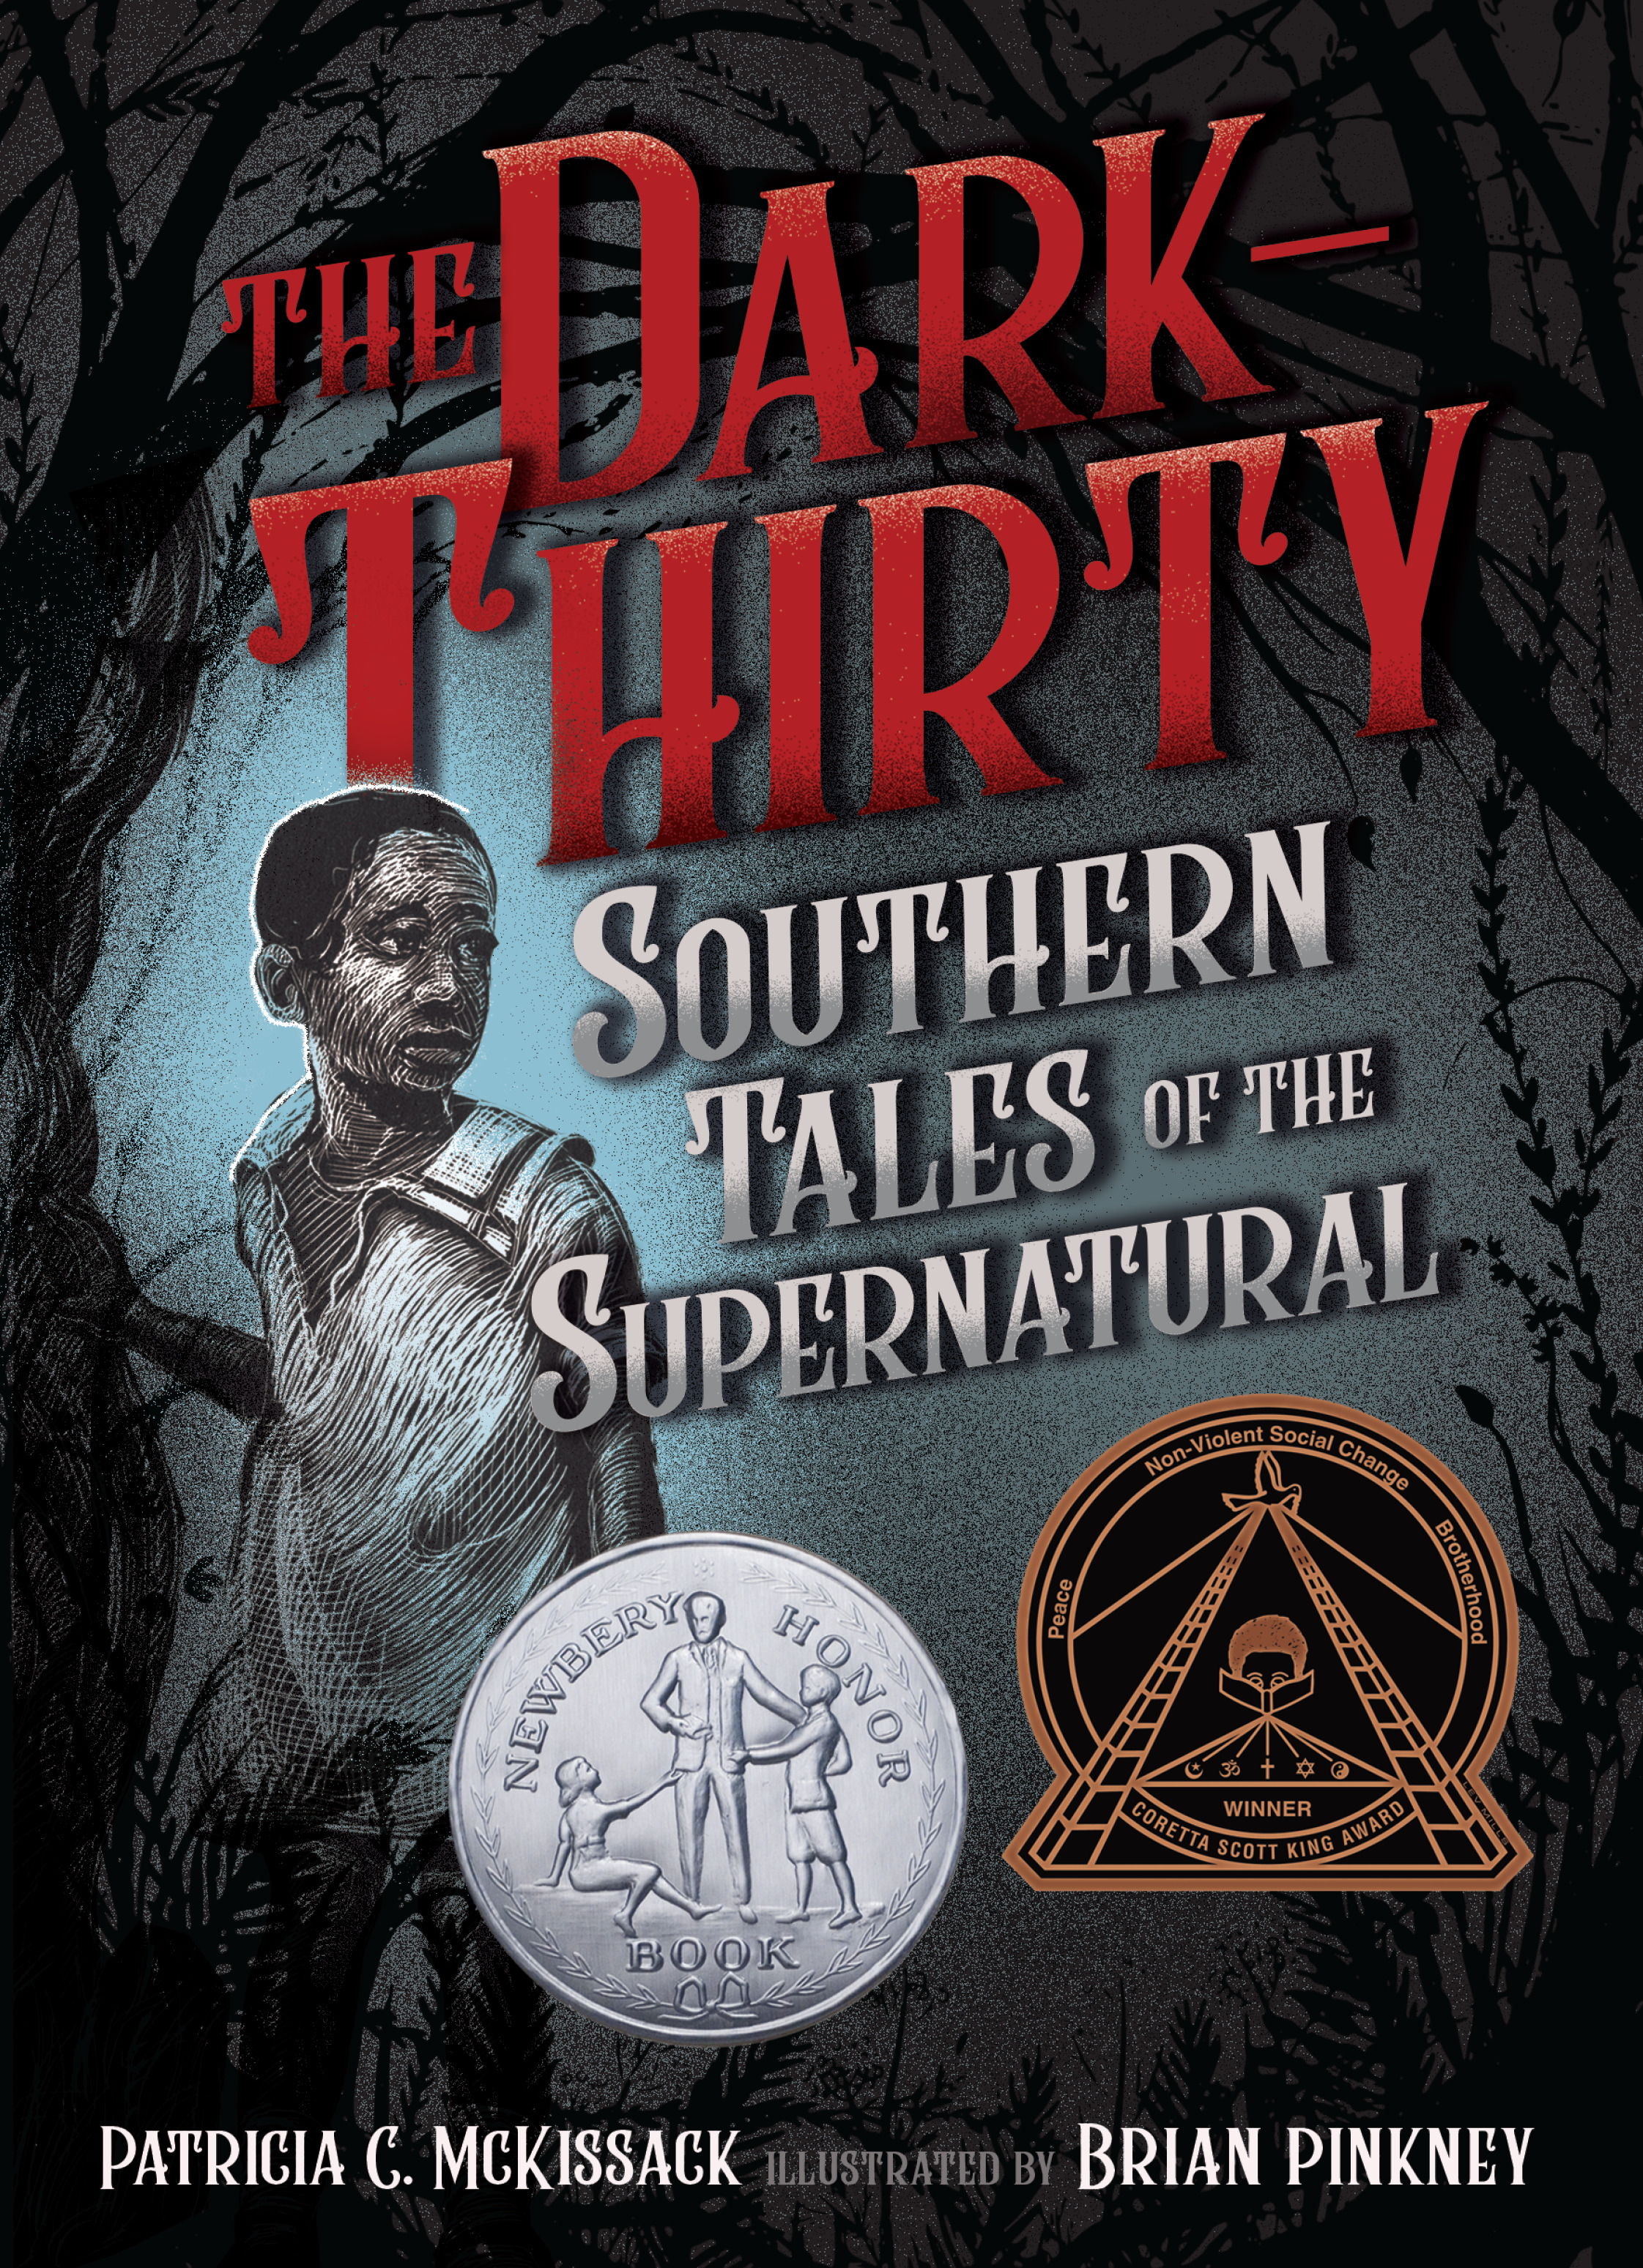 The Dark-Thirty : Southern Tales of the Supernatural | 9-12 years old